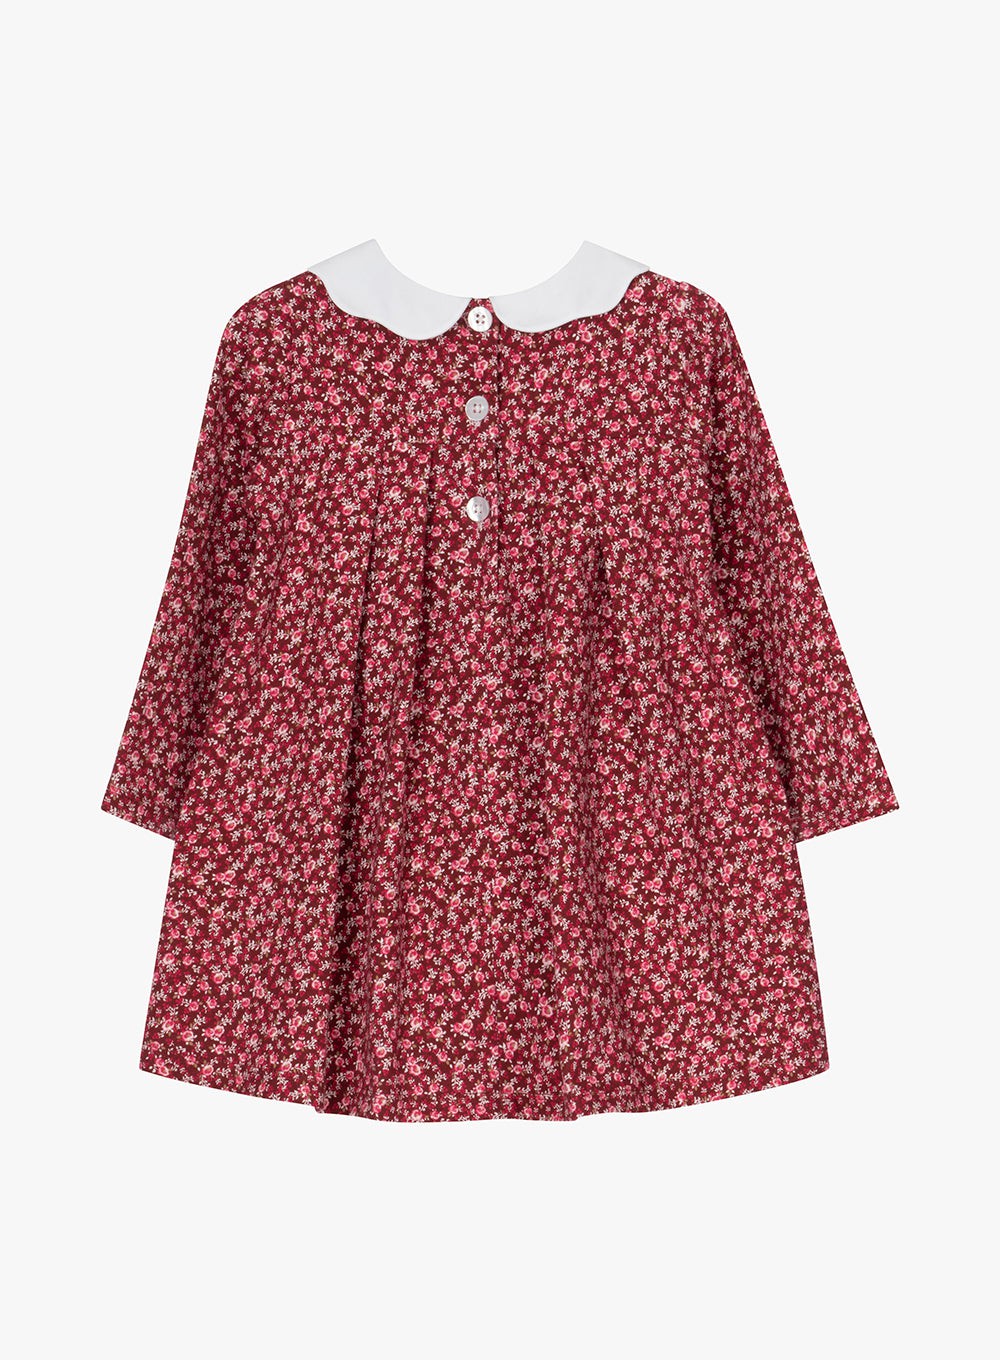 Confiture Dress Little Louise Jersey Dress in Berry Floral